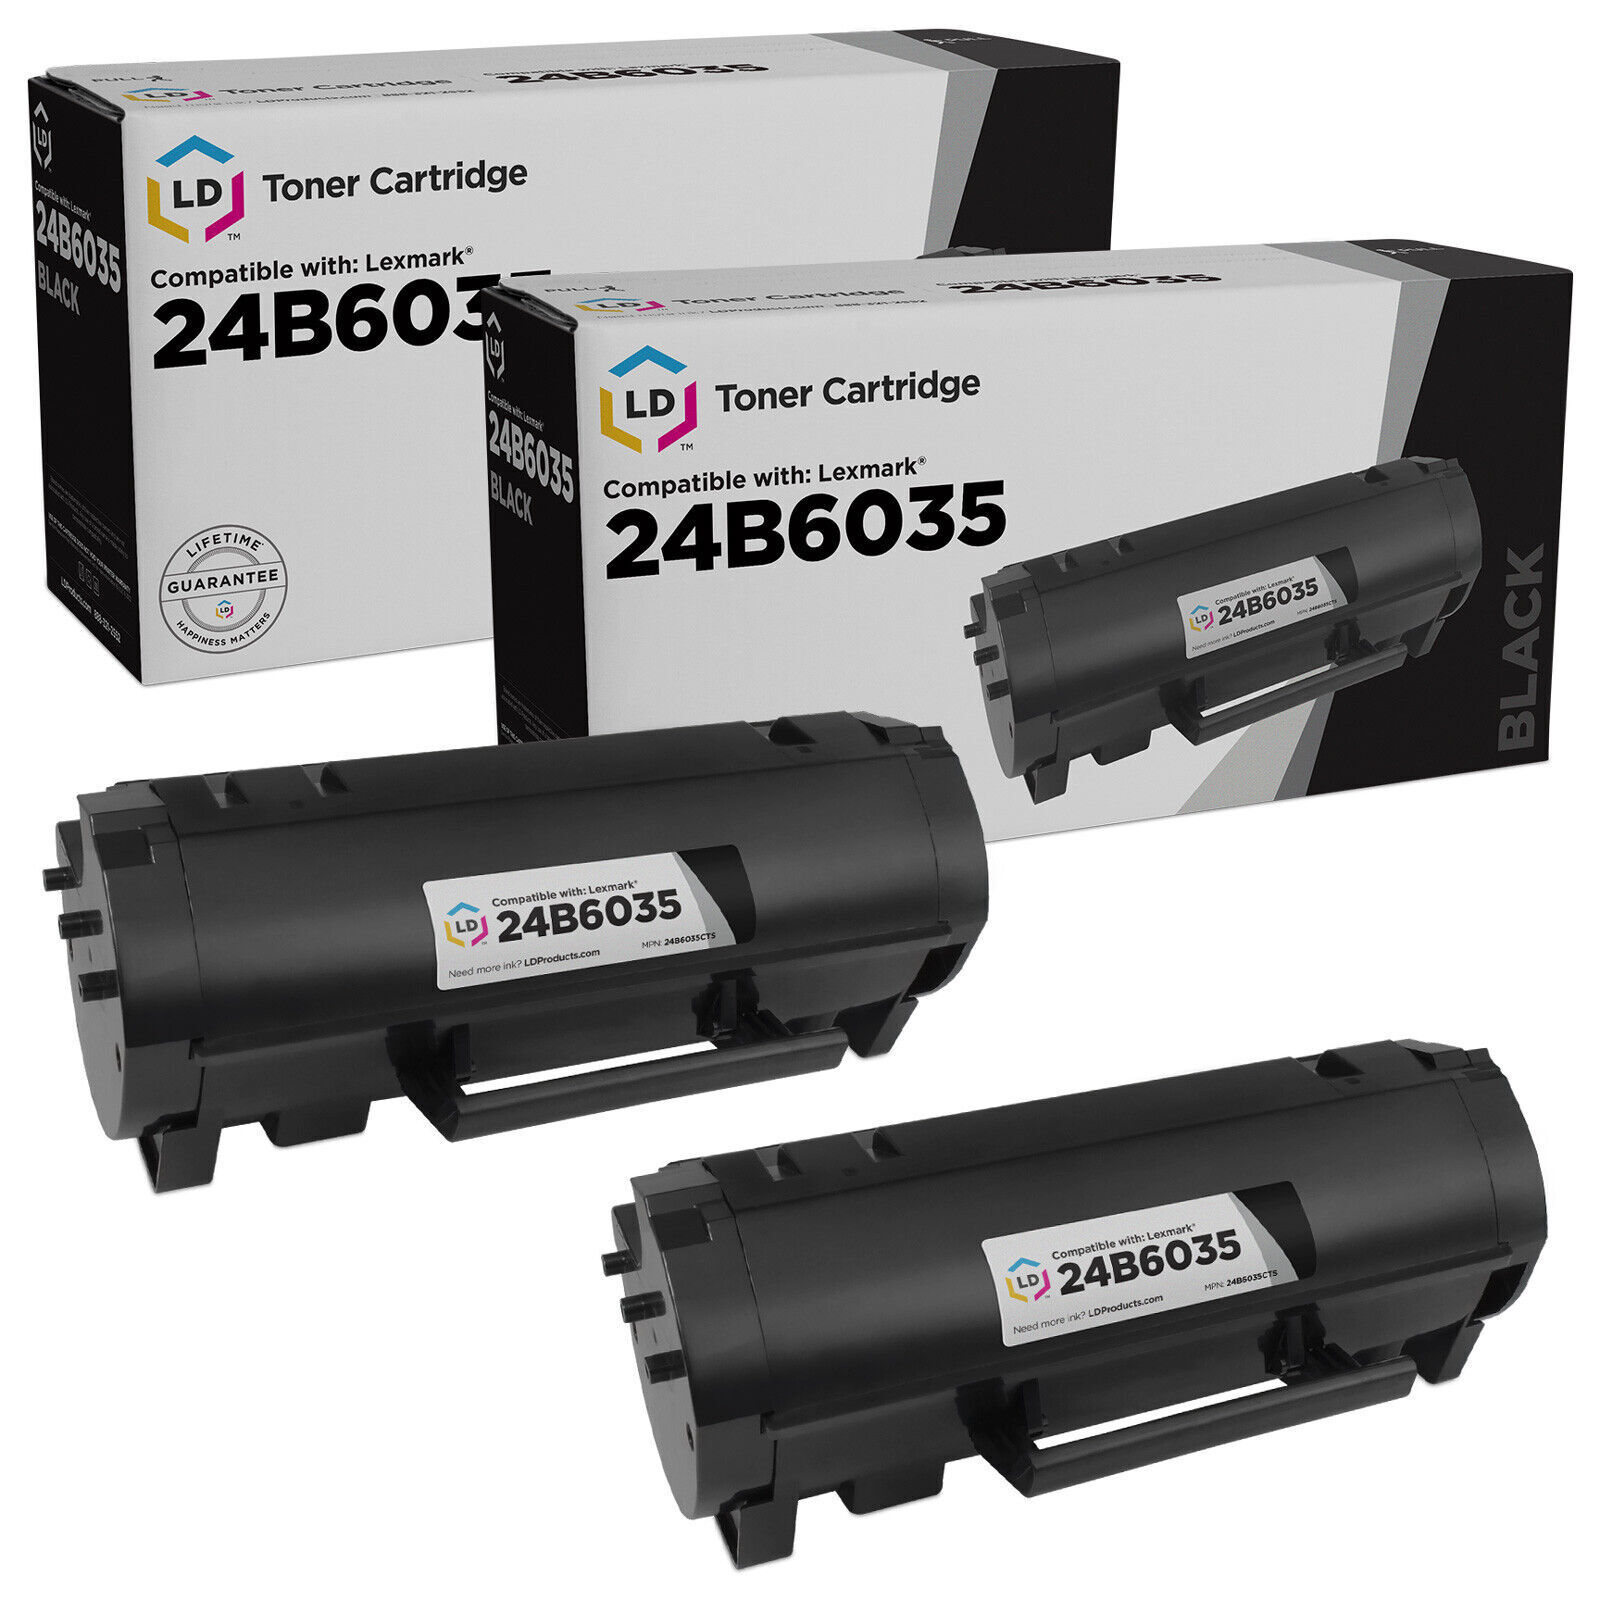 LD Compatible Lexmark 24B6035 Black Toner 2-Pack for use in M1145 & XM1145